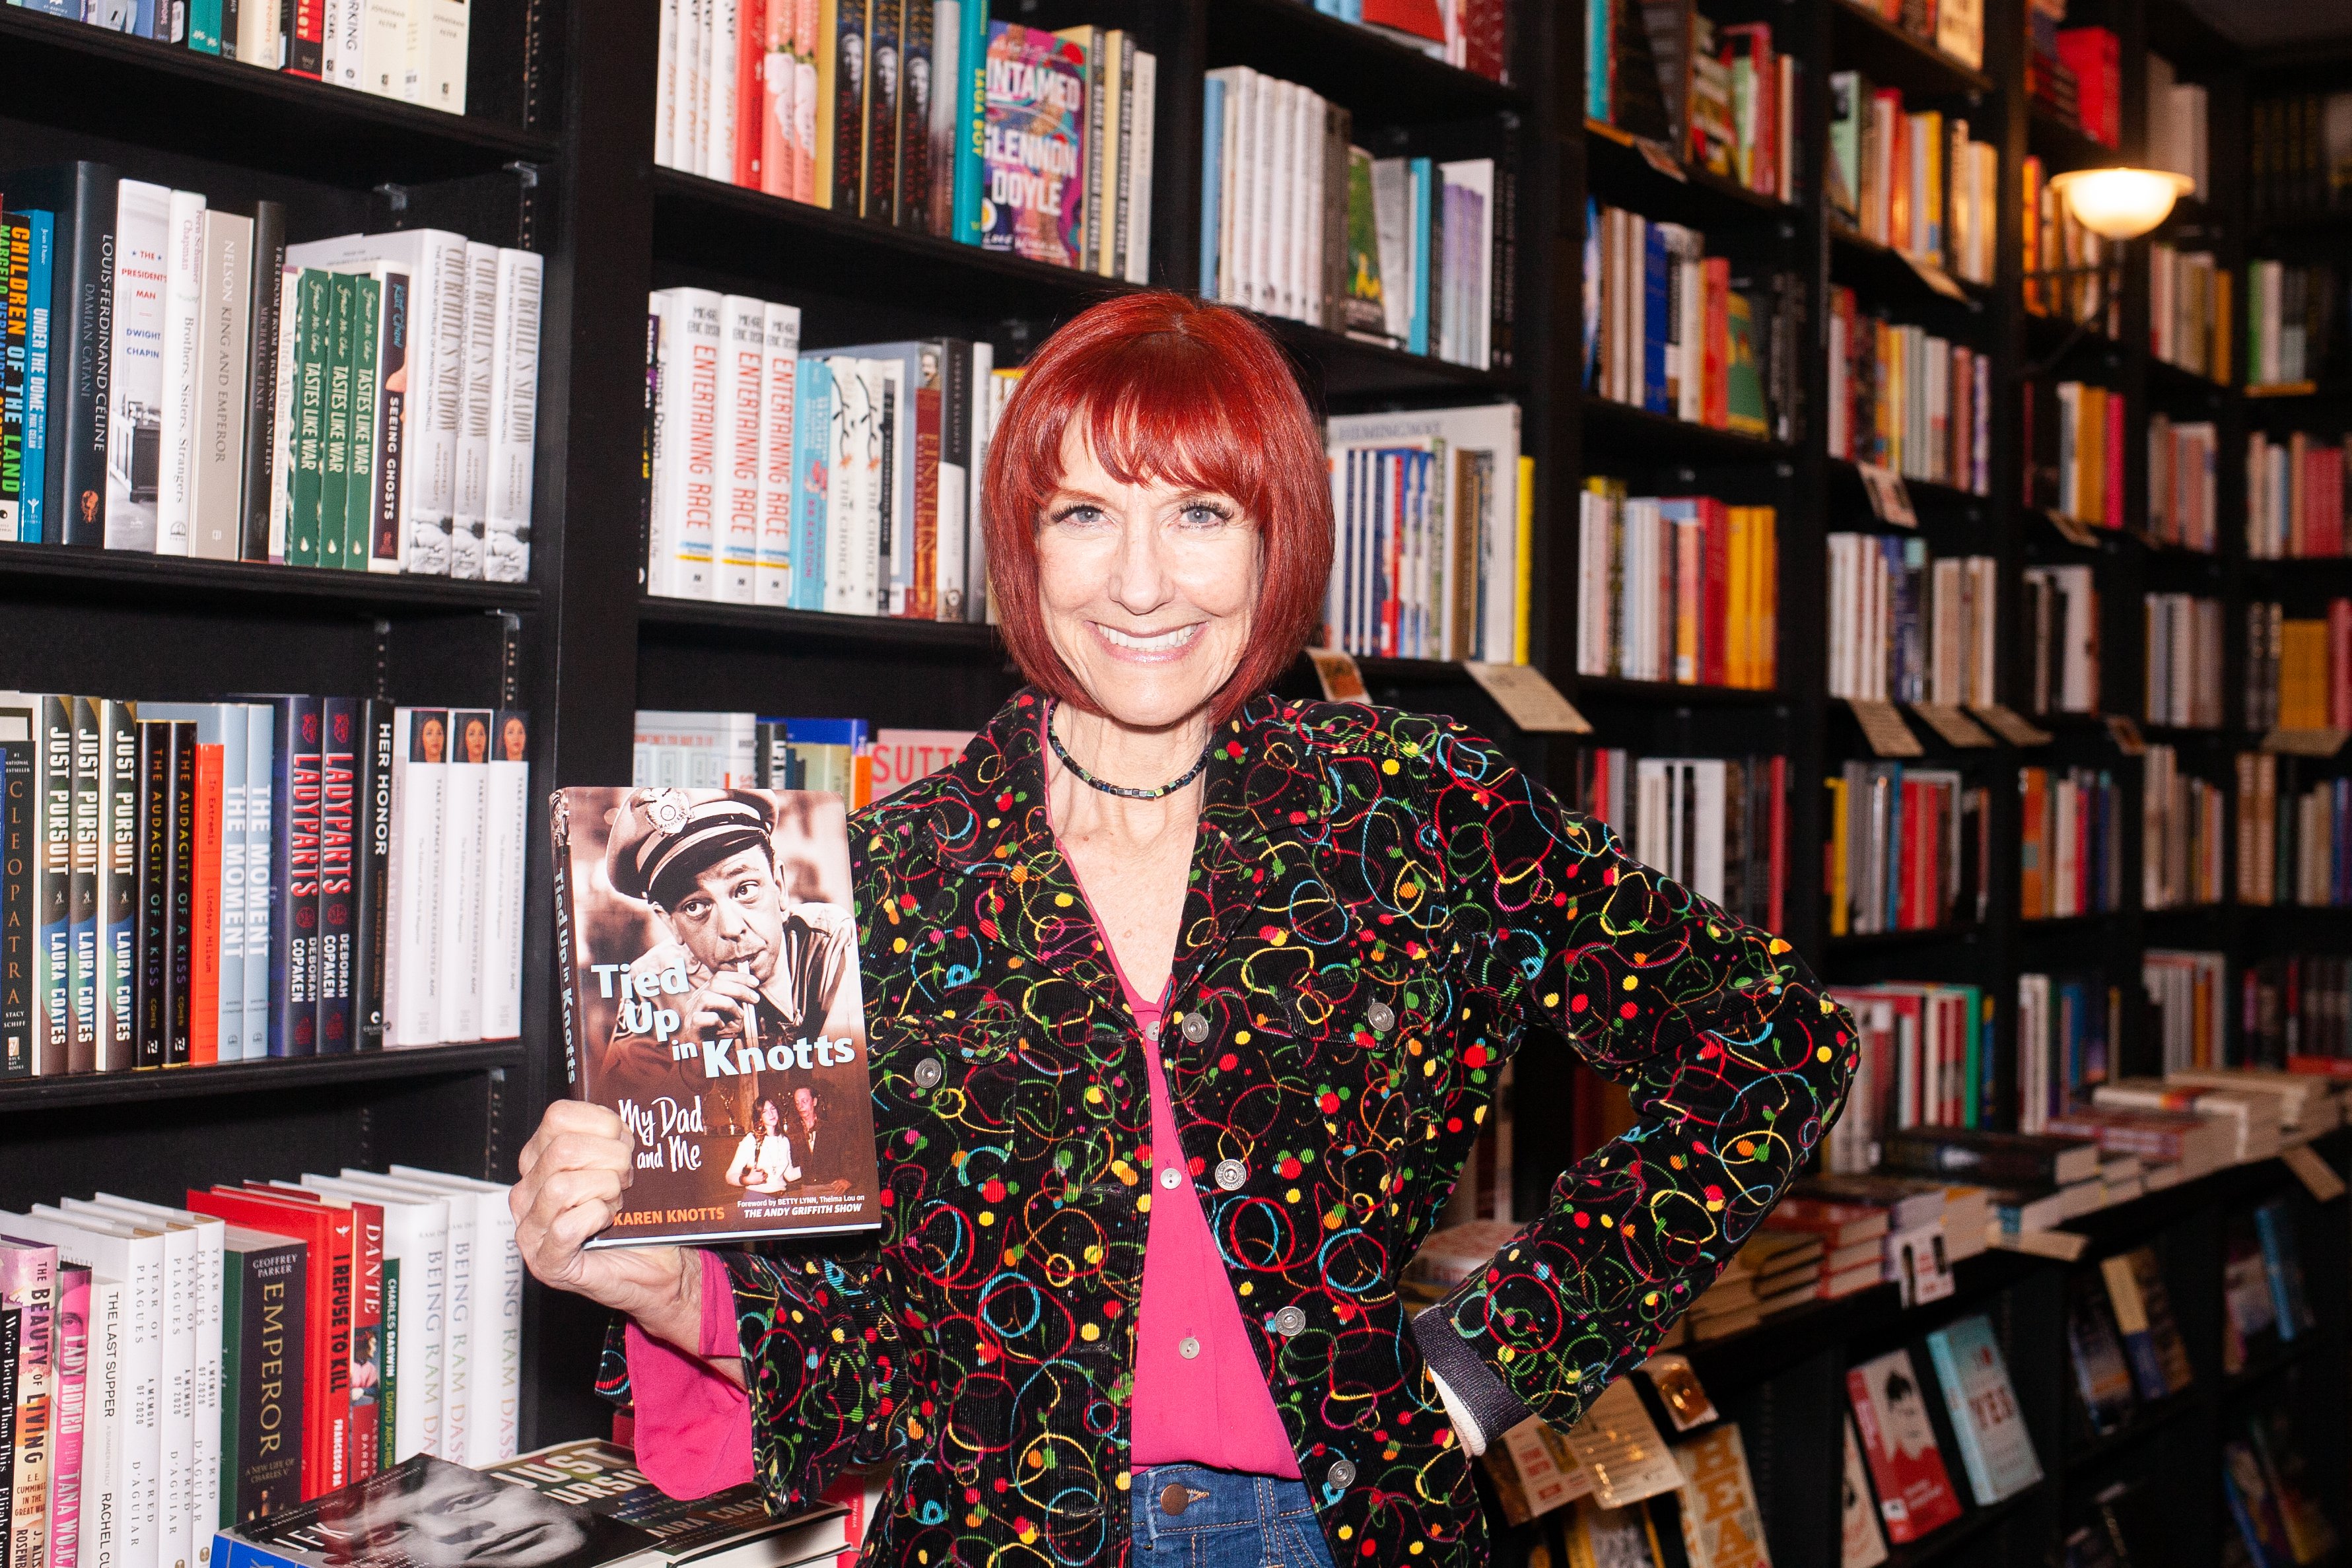 Karen Knotts poses with her memoir "Tied Up in Knotts" at Book Soup on March 03, 2022 in West Hollywood, California. | Source: Getty Images